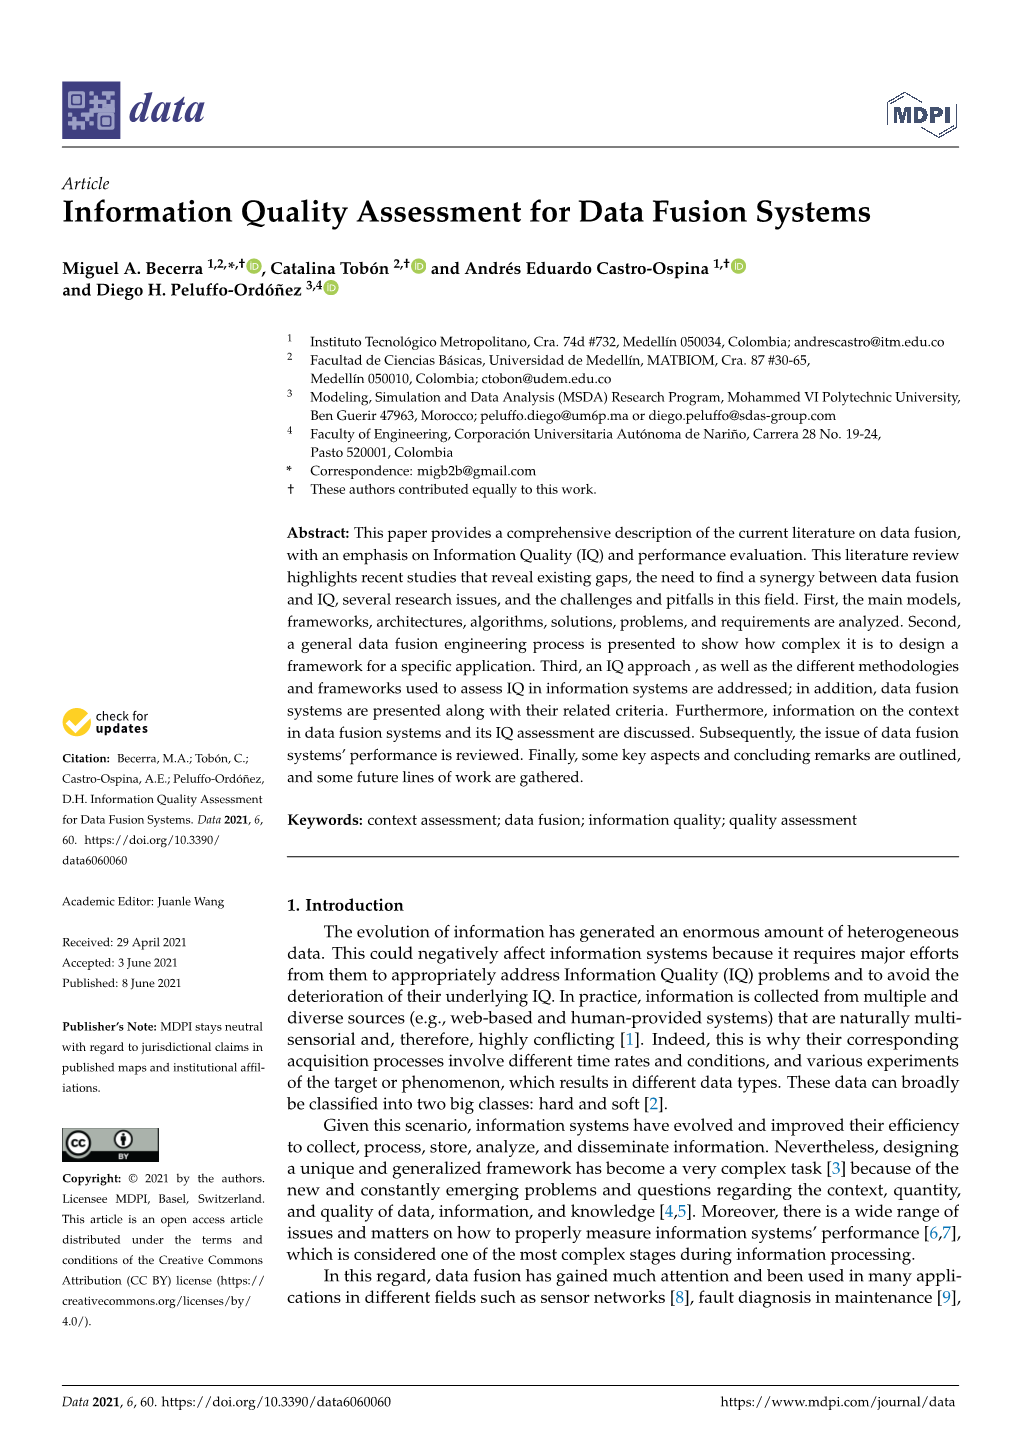 Information Quality Assessment for Data Fusion Systems